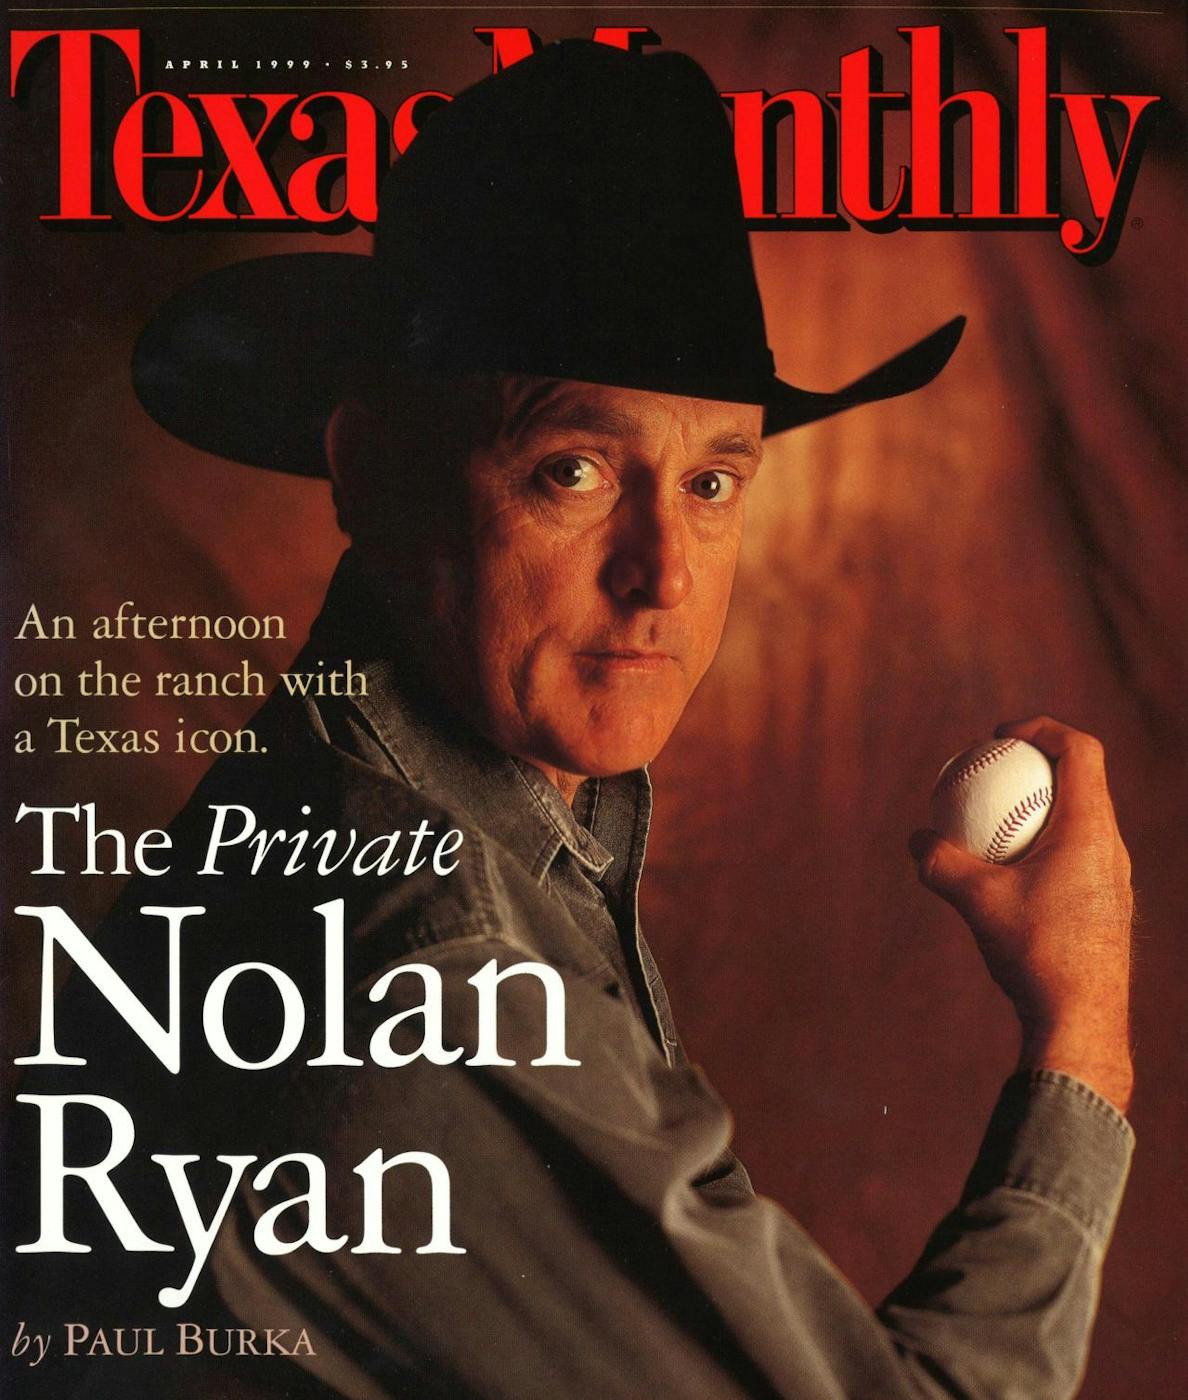 New Nolan Ryan book details why he didn't end career with Angels